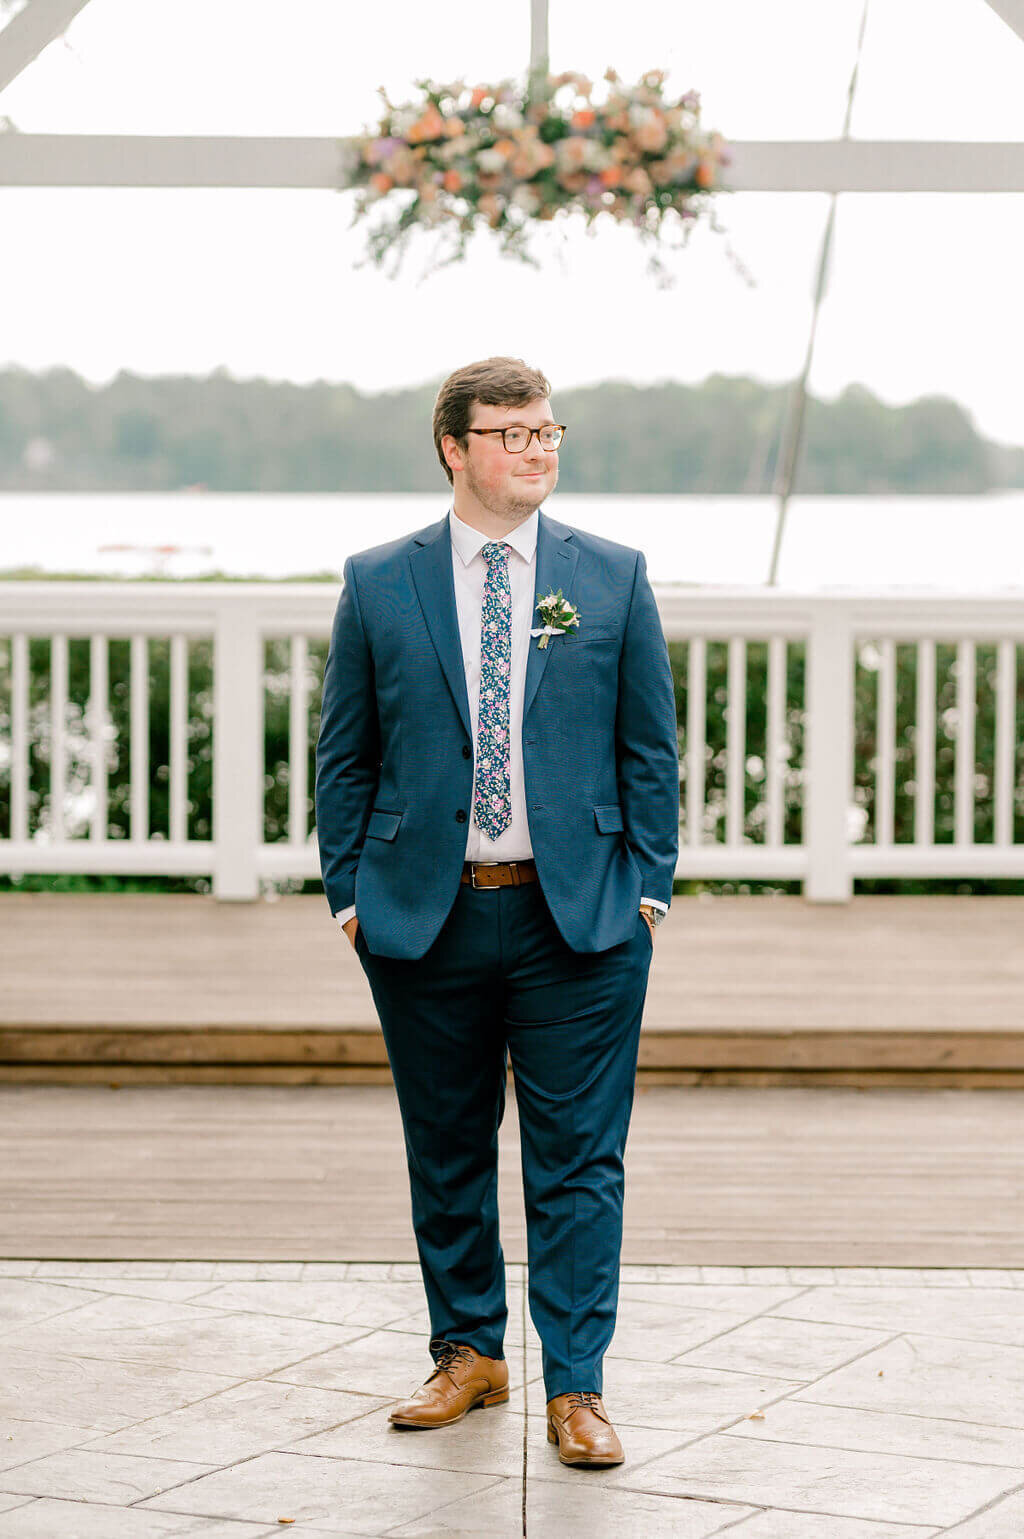 Classic image of the groom standing with hands in his pockets on his wedding day.